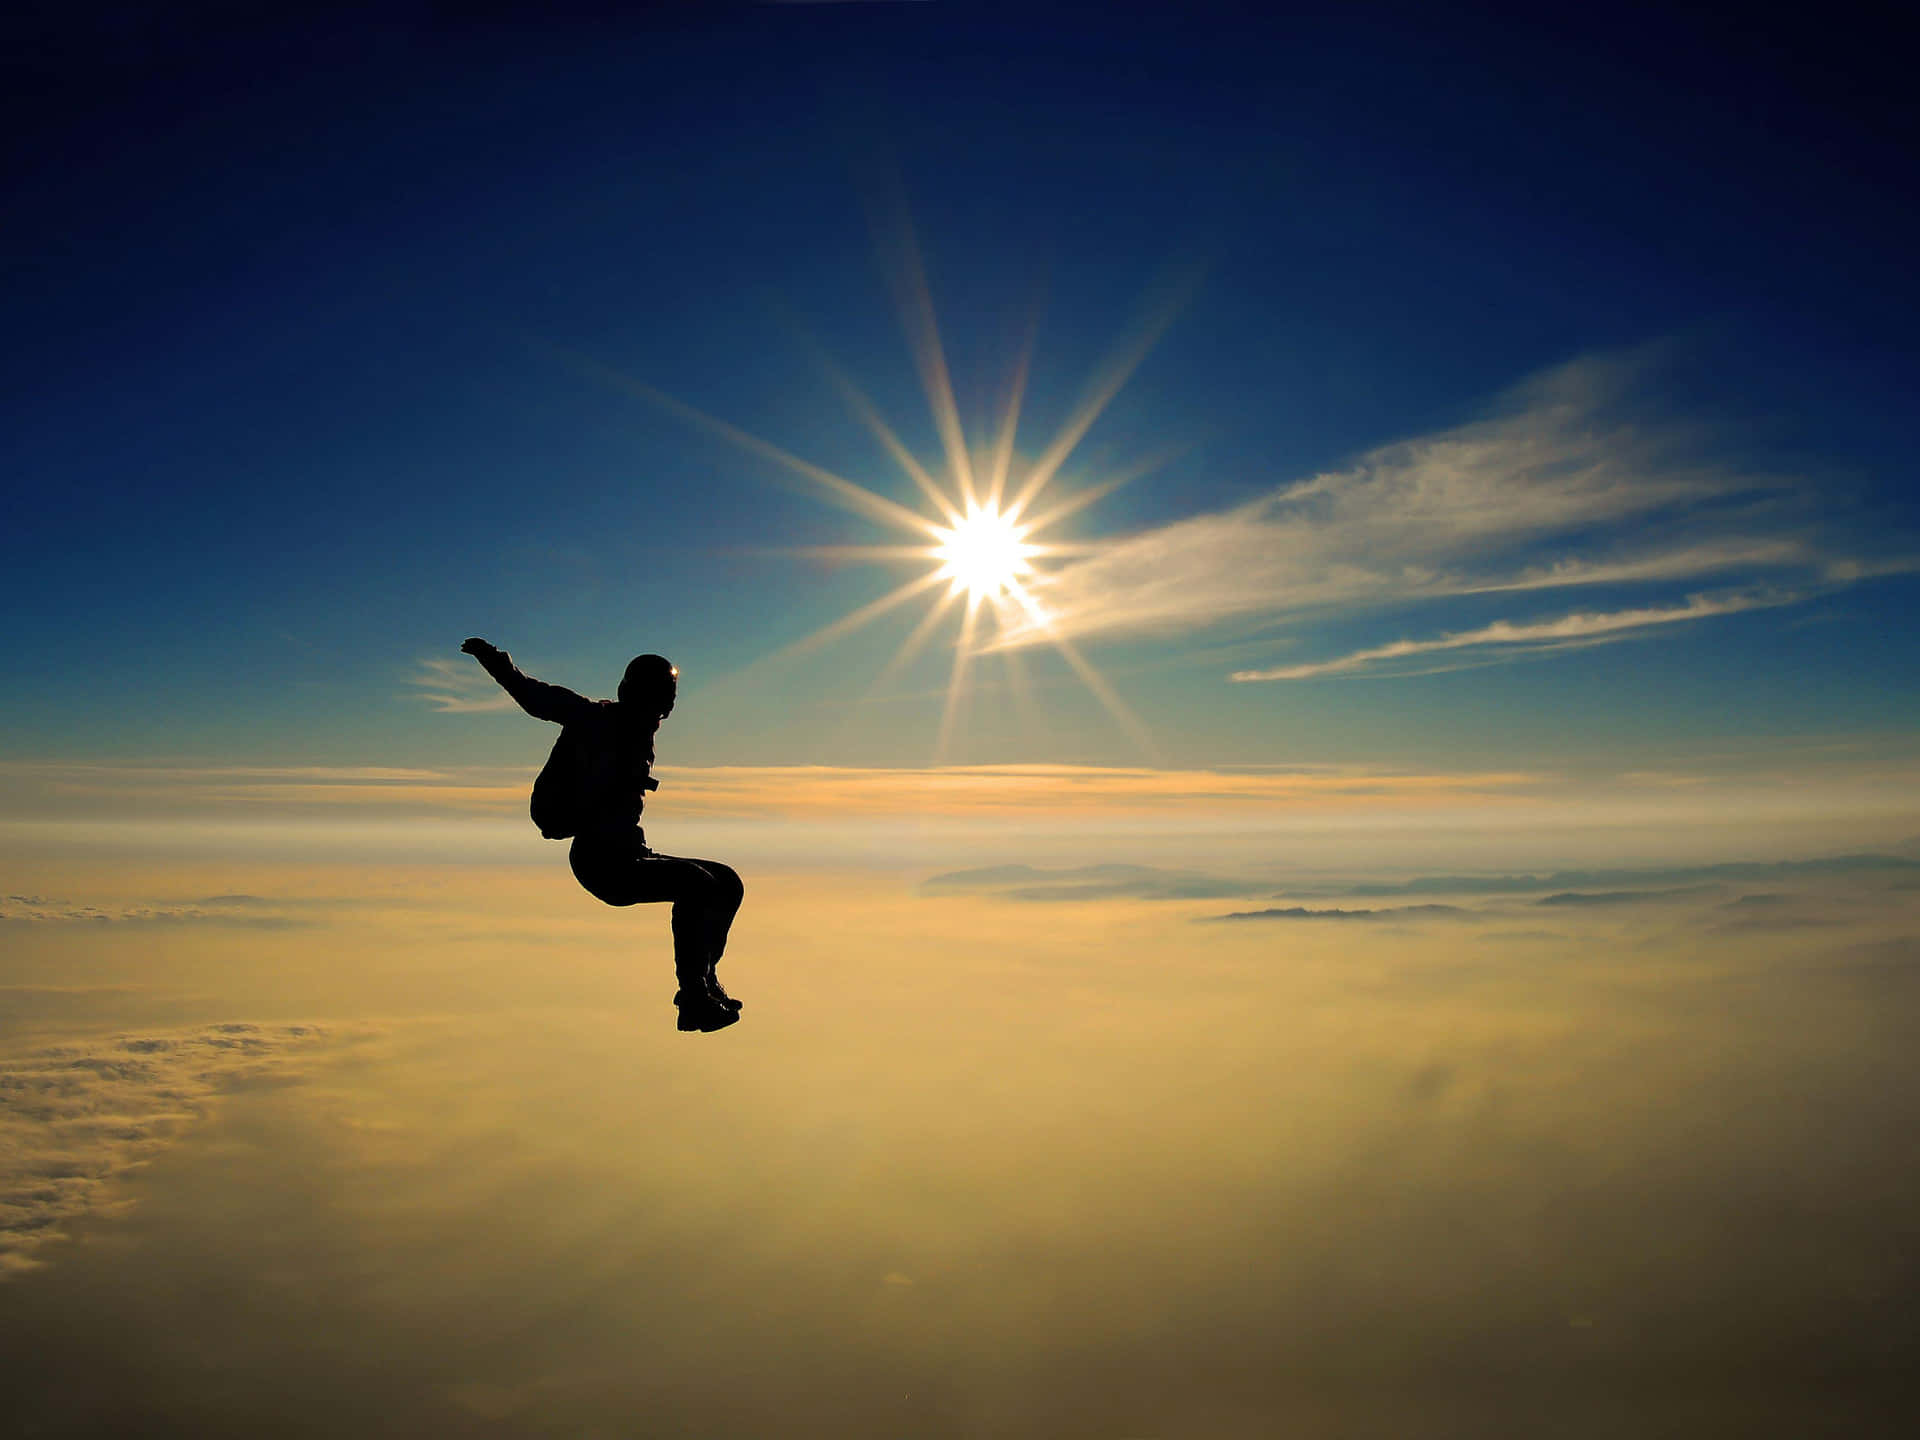 Get Ready to Expericence the Thrill of Skydiving